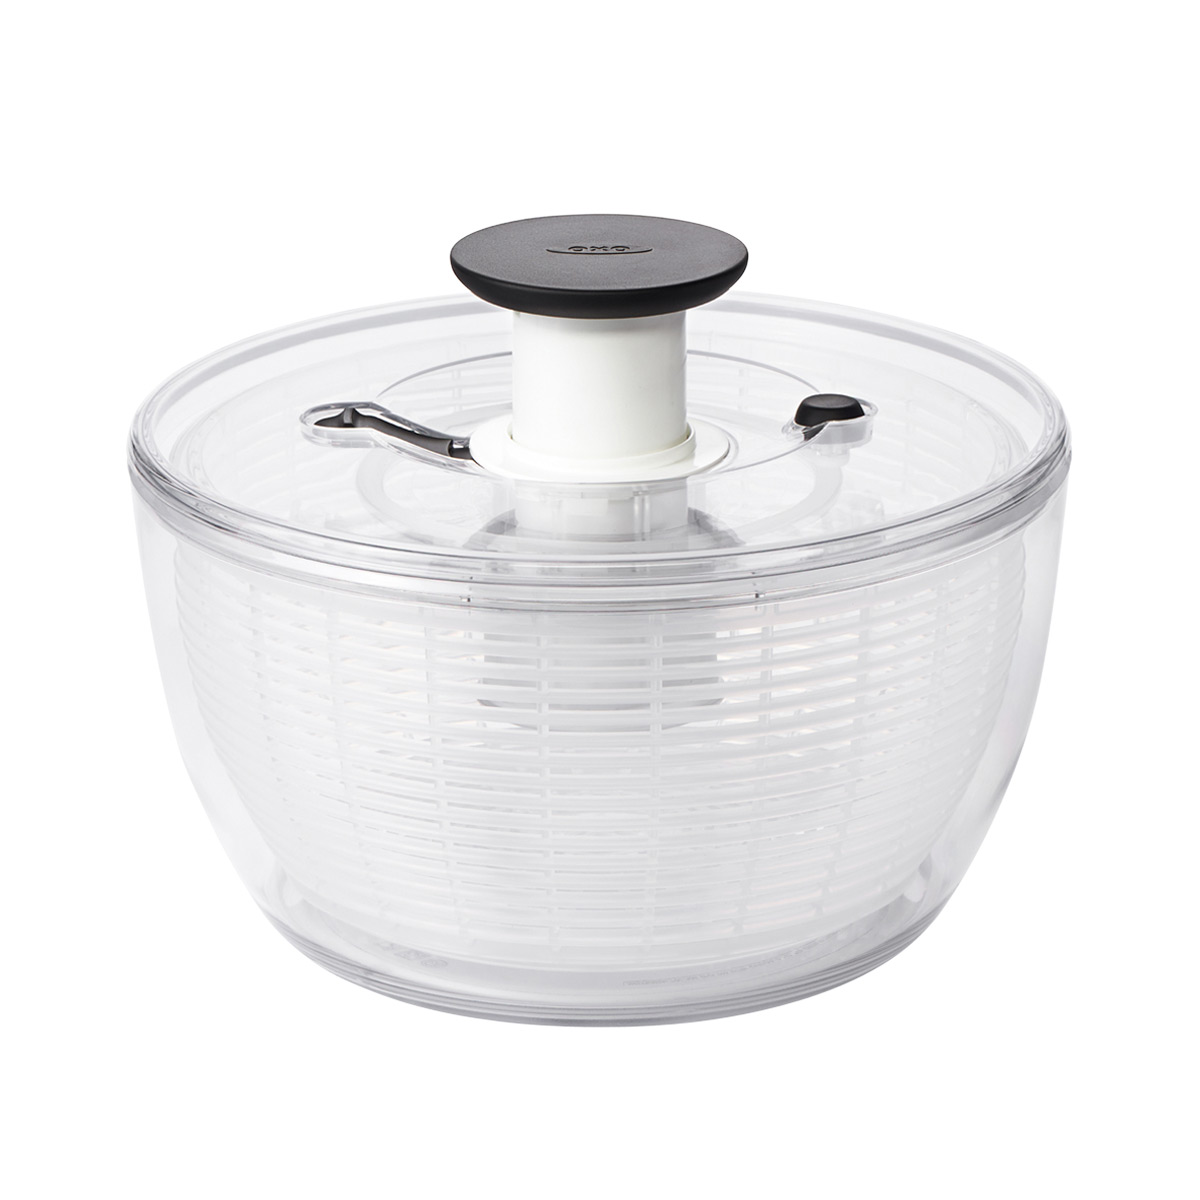 https://www.containerstore.com/catalogimages/335241/10073155-OXO-Salad-Spinner-Clear-Ven.jpg